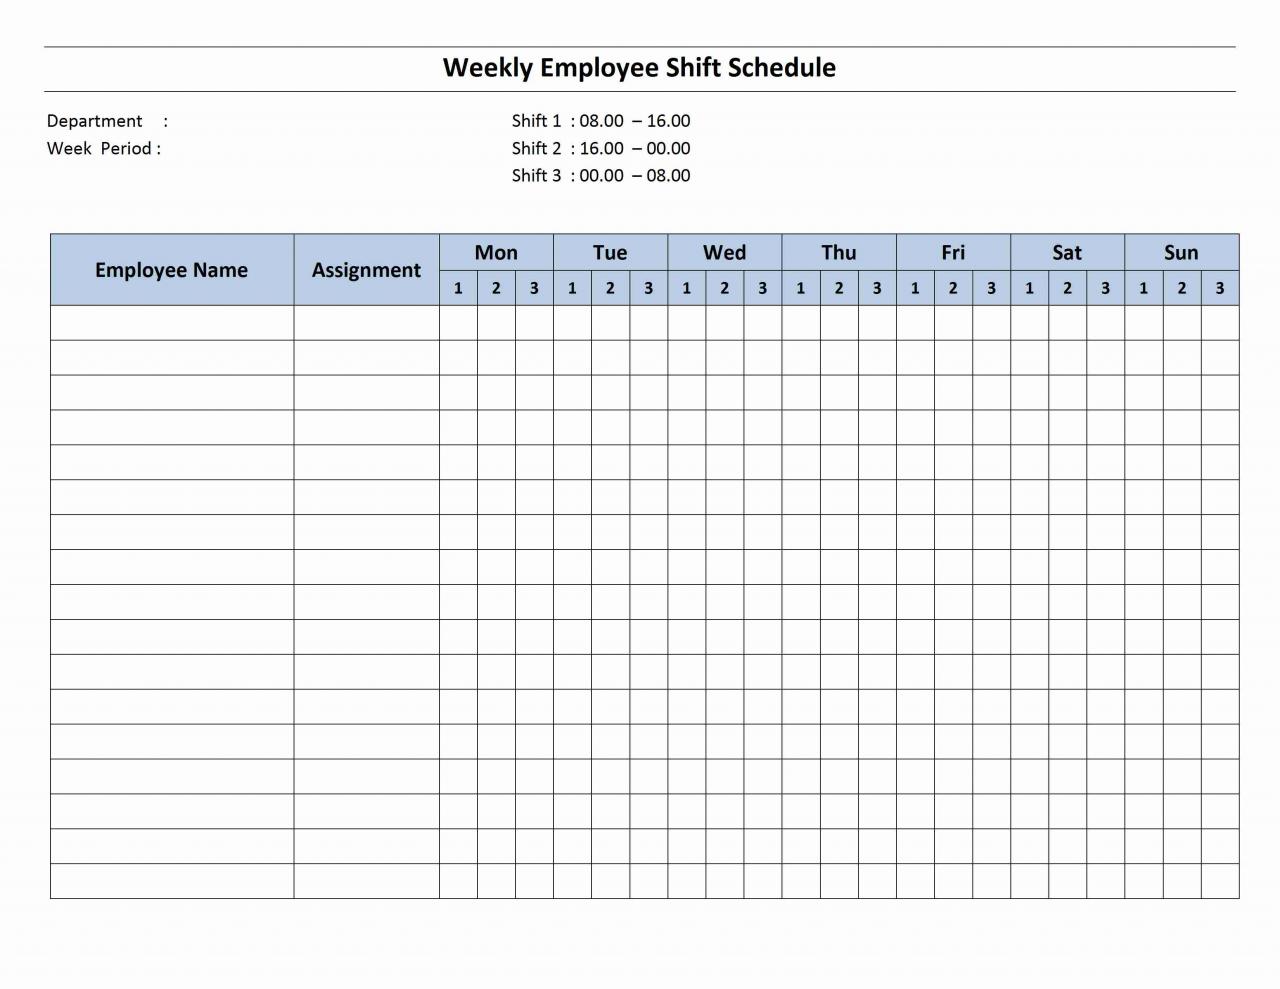 An employee works 21 days per month